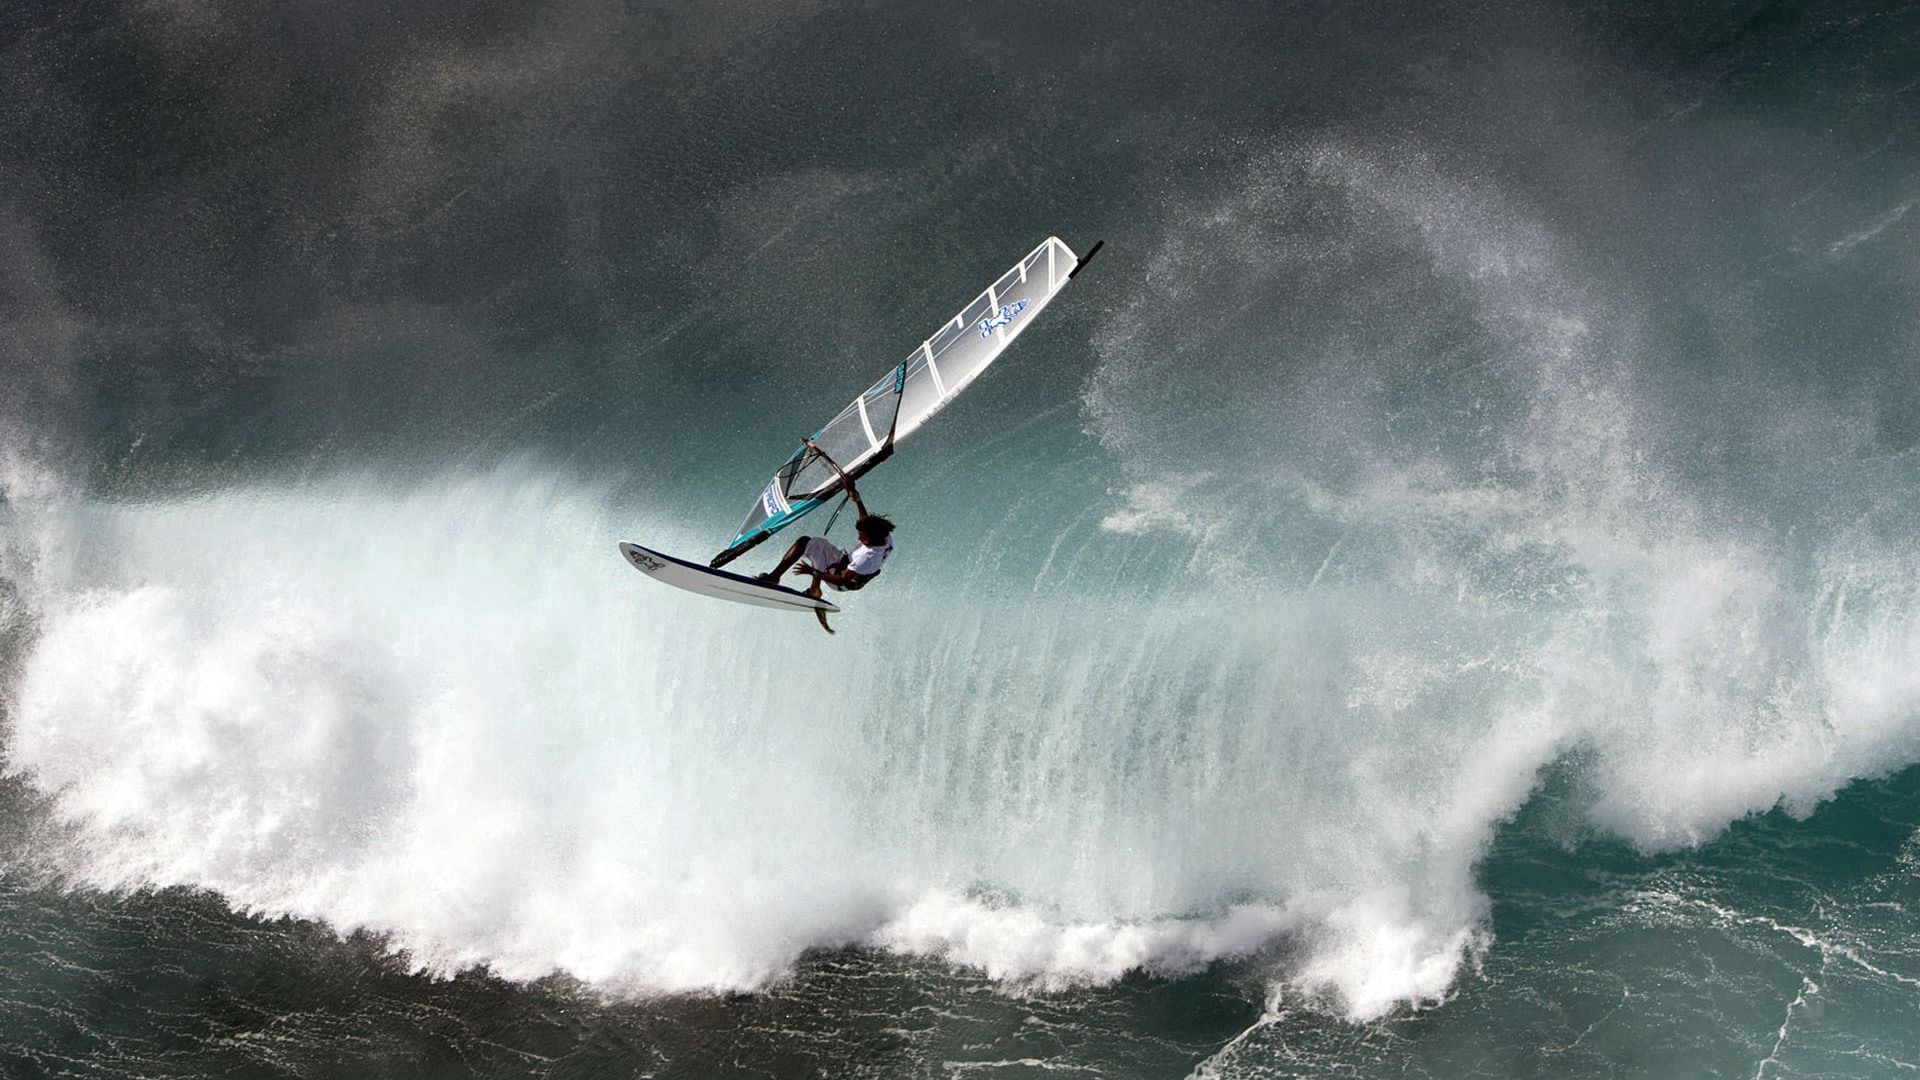 Download wallpaper 1920x1080 windsurfing, wave, water, sports full hd, hdtv, fhd, 1080p HD background